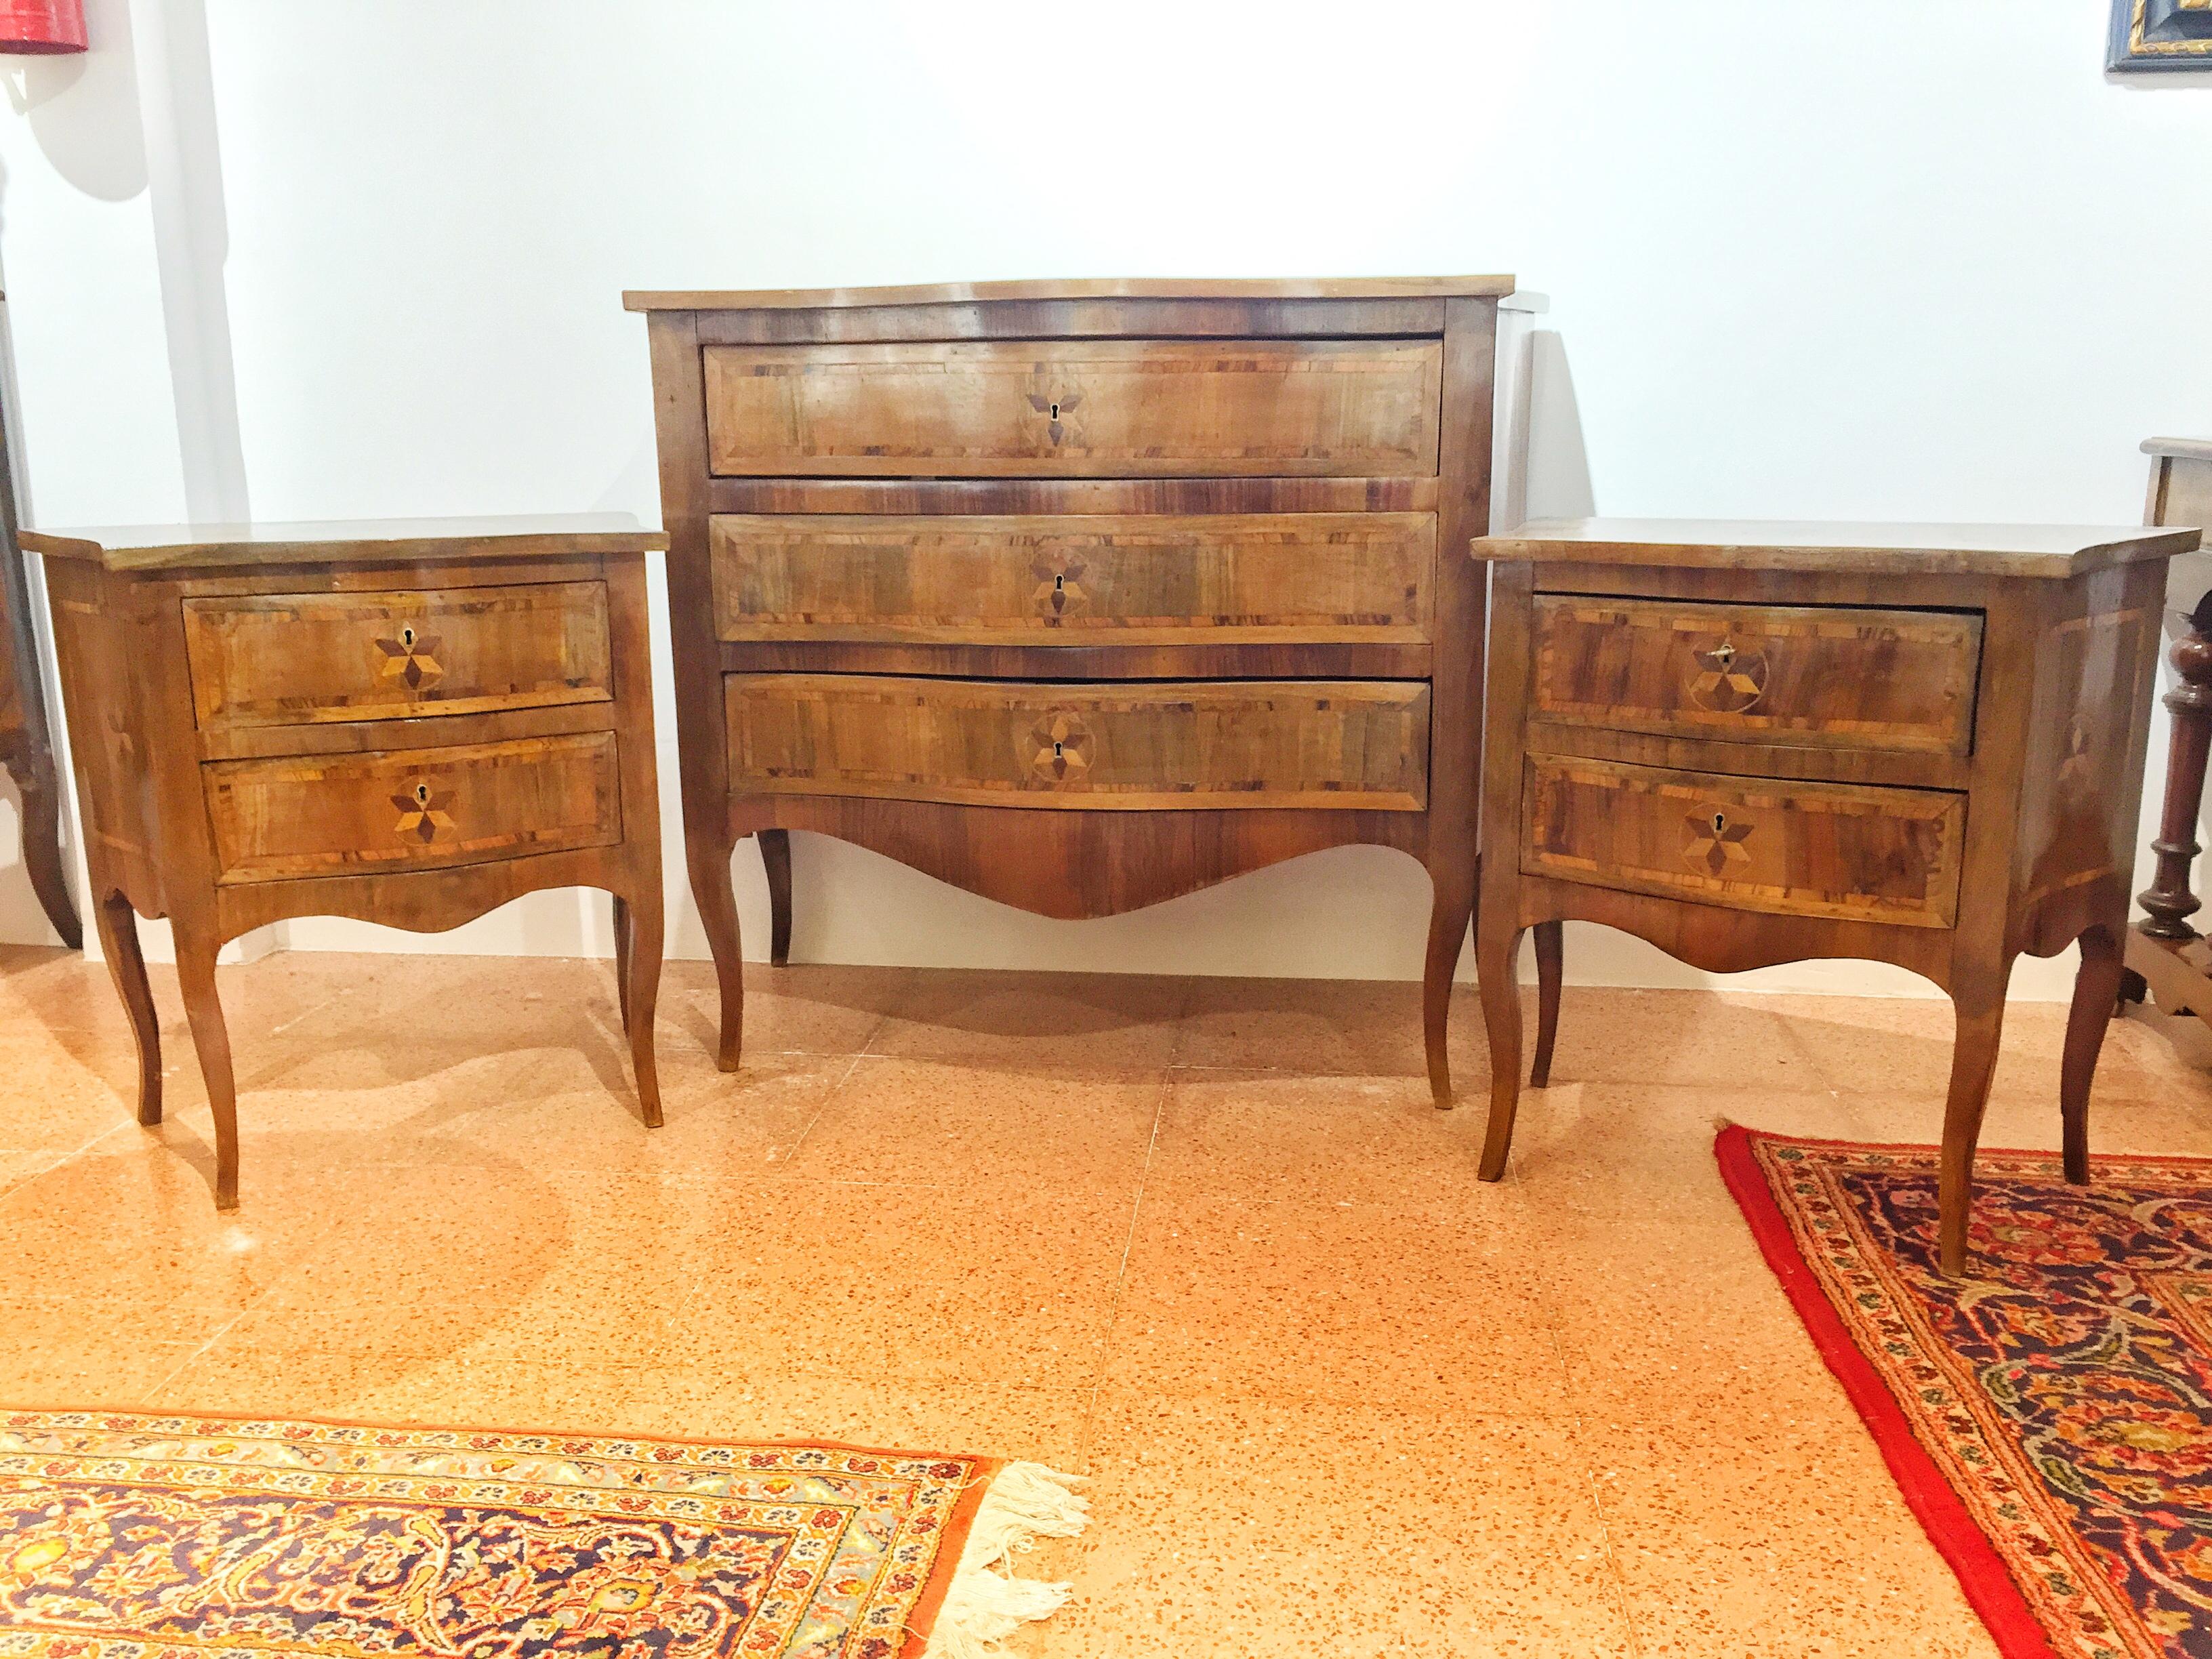 Italian inlaid commode dresser commode and two bedside tables, early 20th century. Walnut, with six working keys and three drawers.

Badside tables measures: 
Depth: 40 cm
Width: 67 cm
Height: 70 cm

Beautiful chest of drawers with two bedside